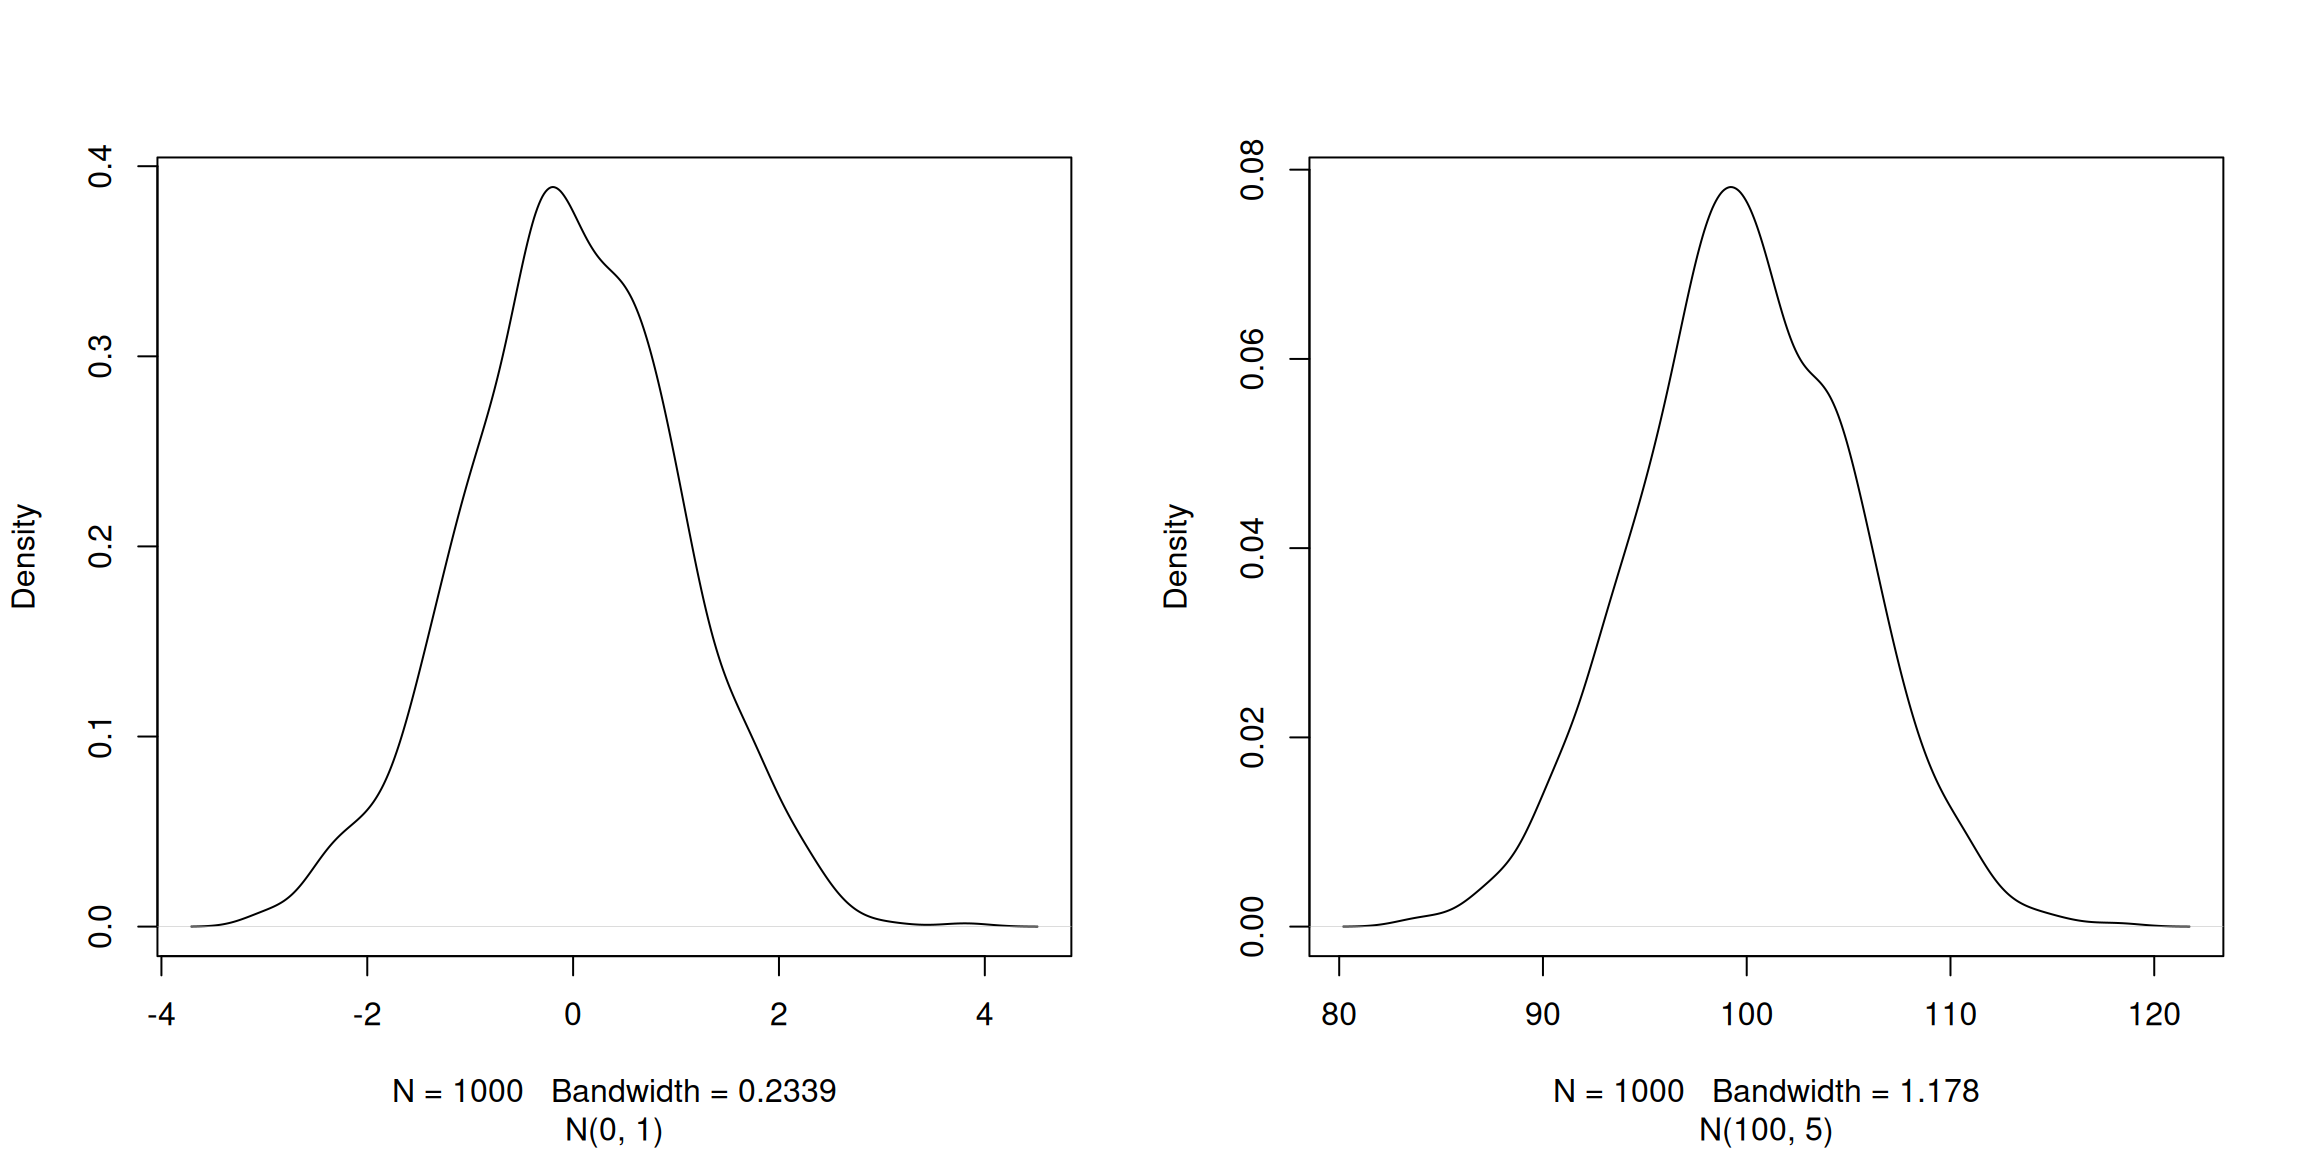 Two normal distributions: *N(0, 1)* on the left and *N(100, 5)* on the right.